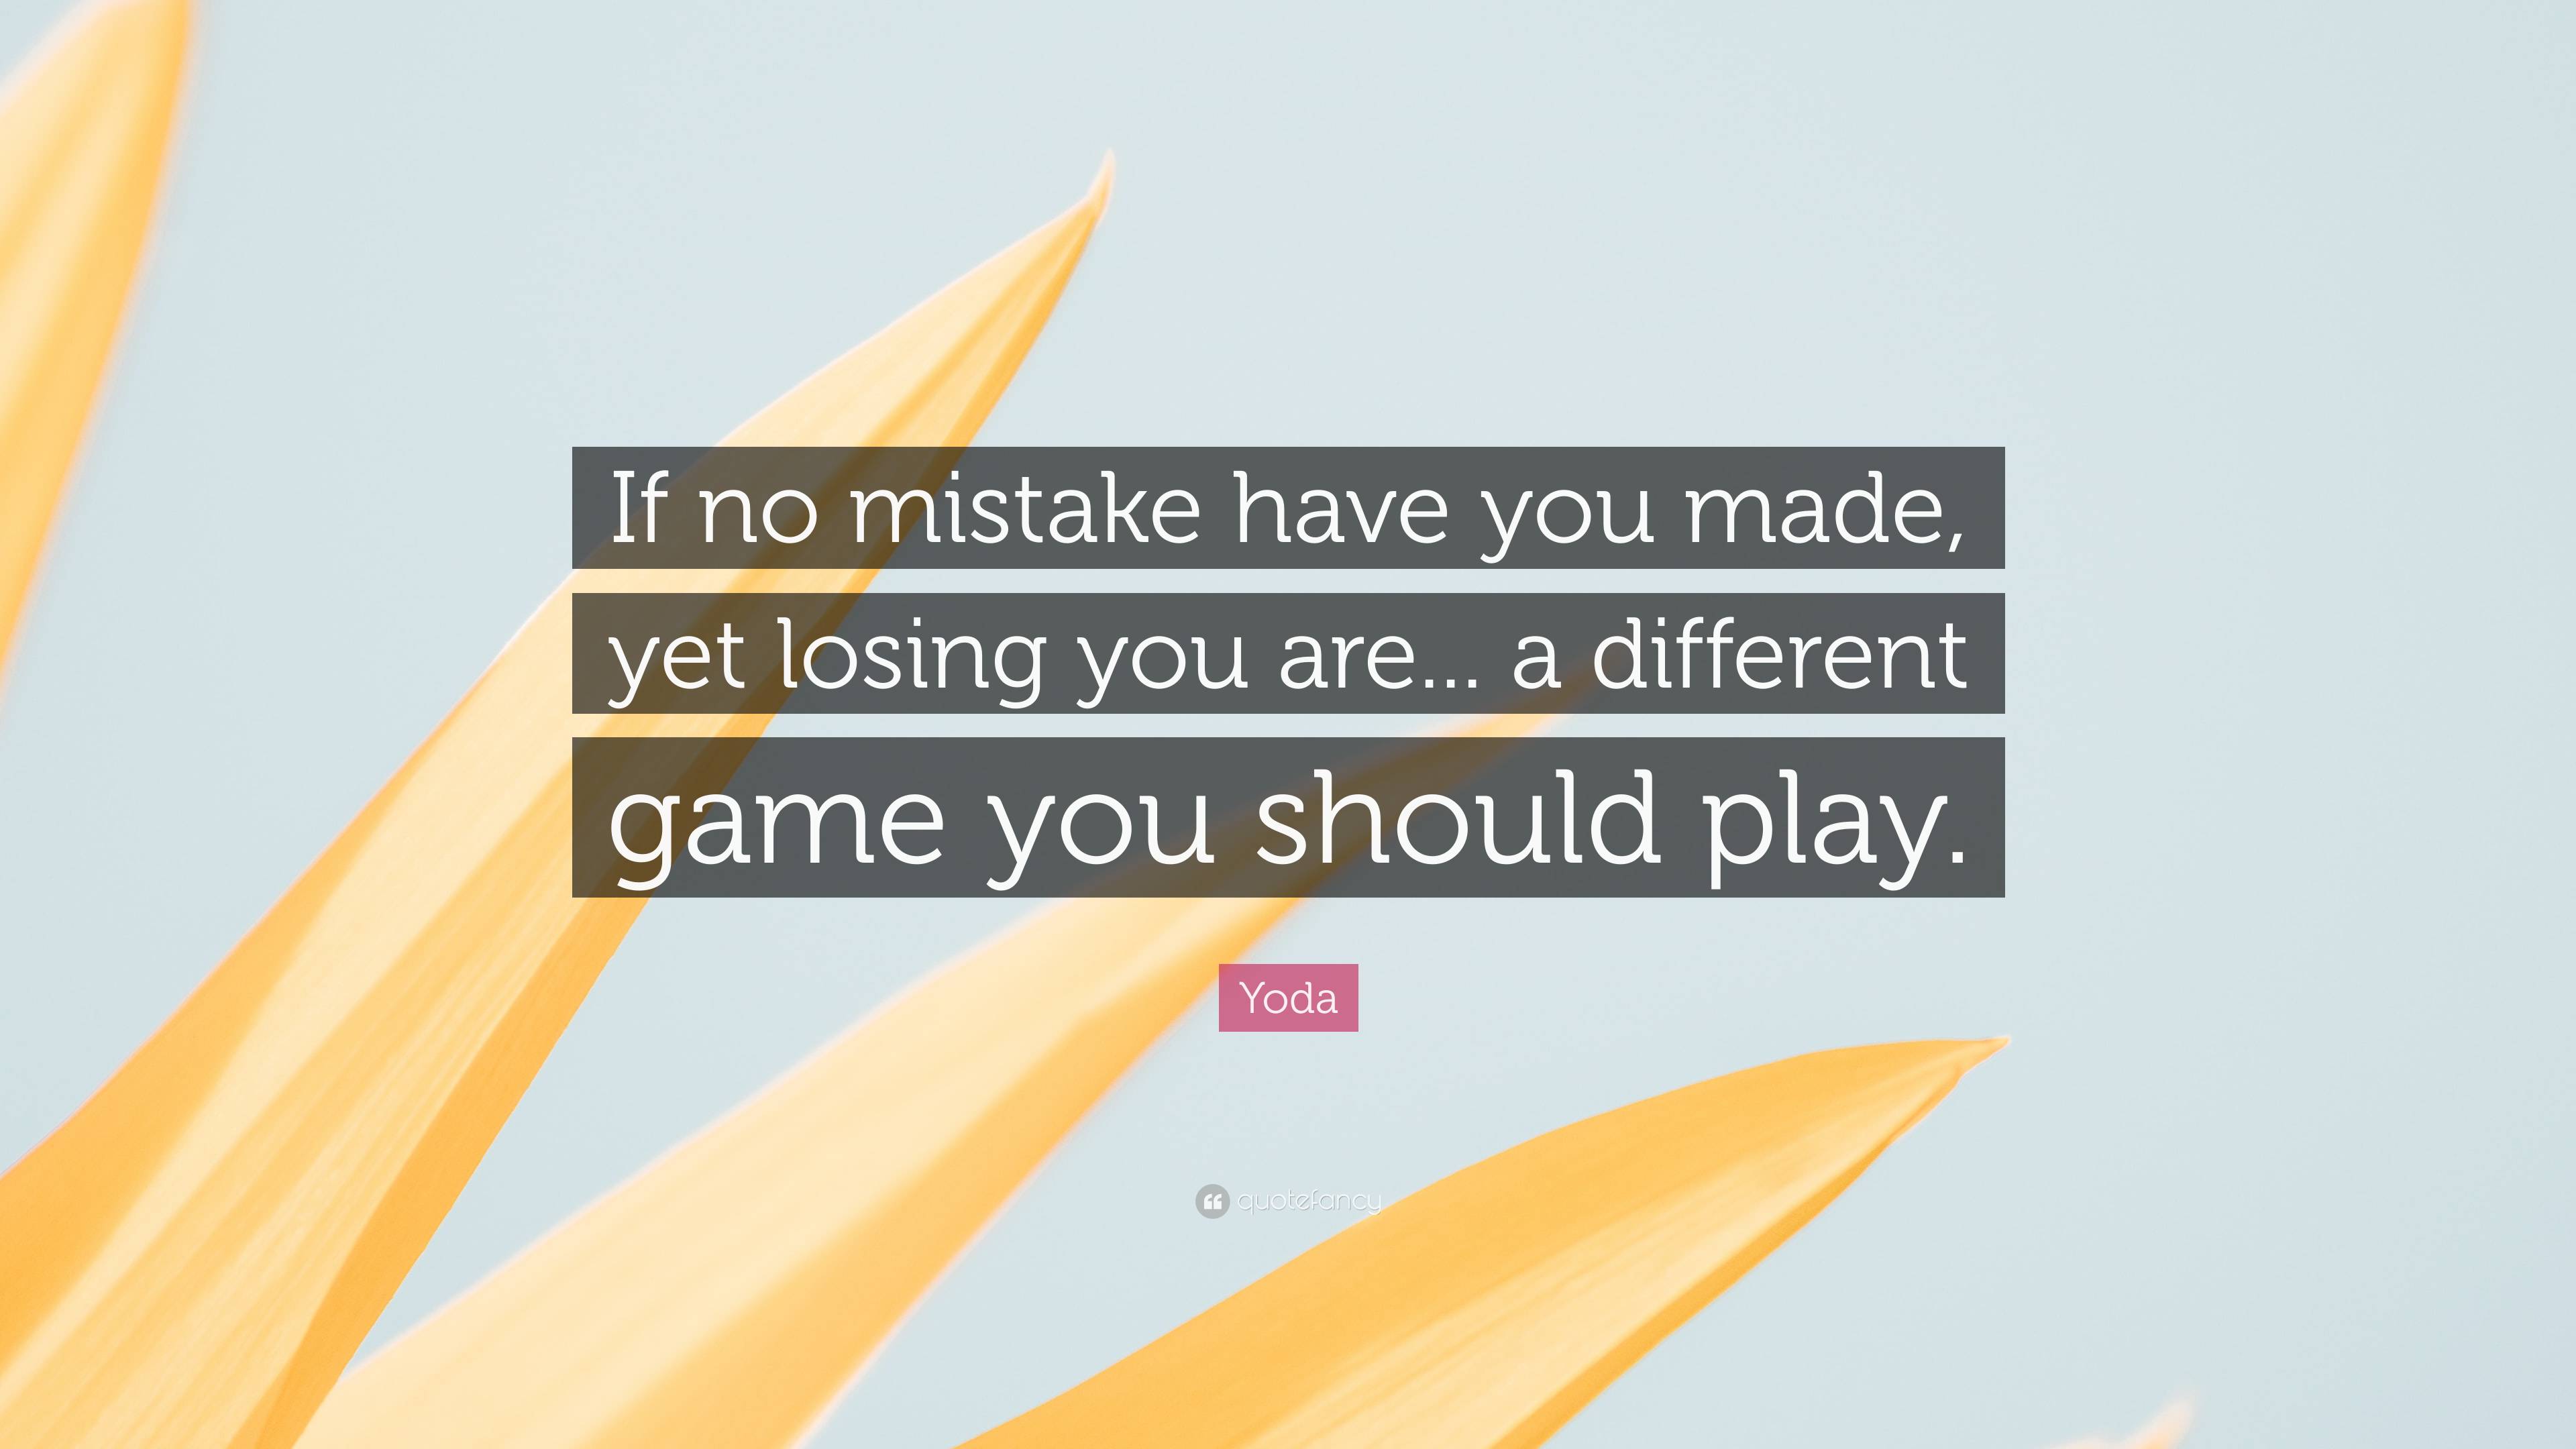 Have You Made This Mistake? 